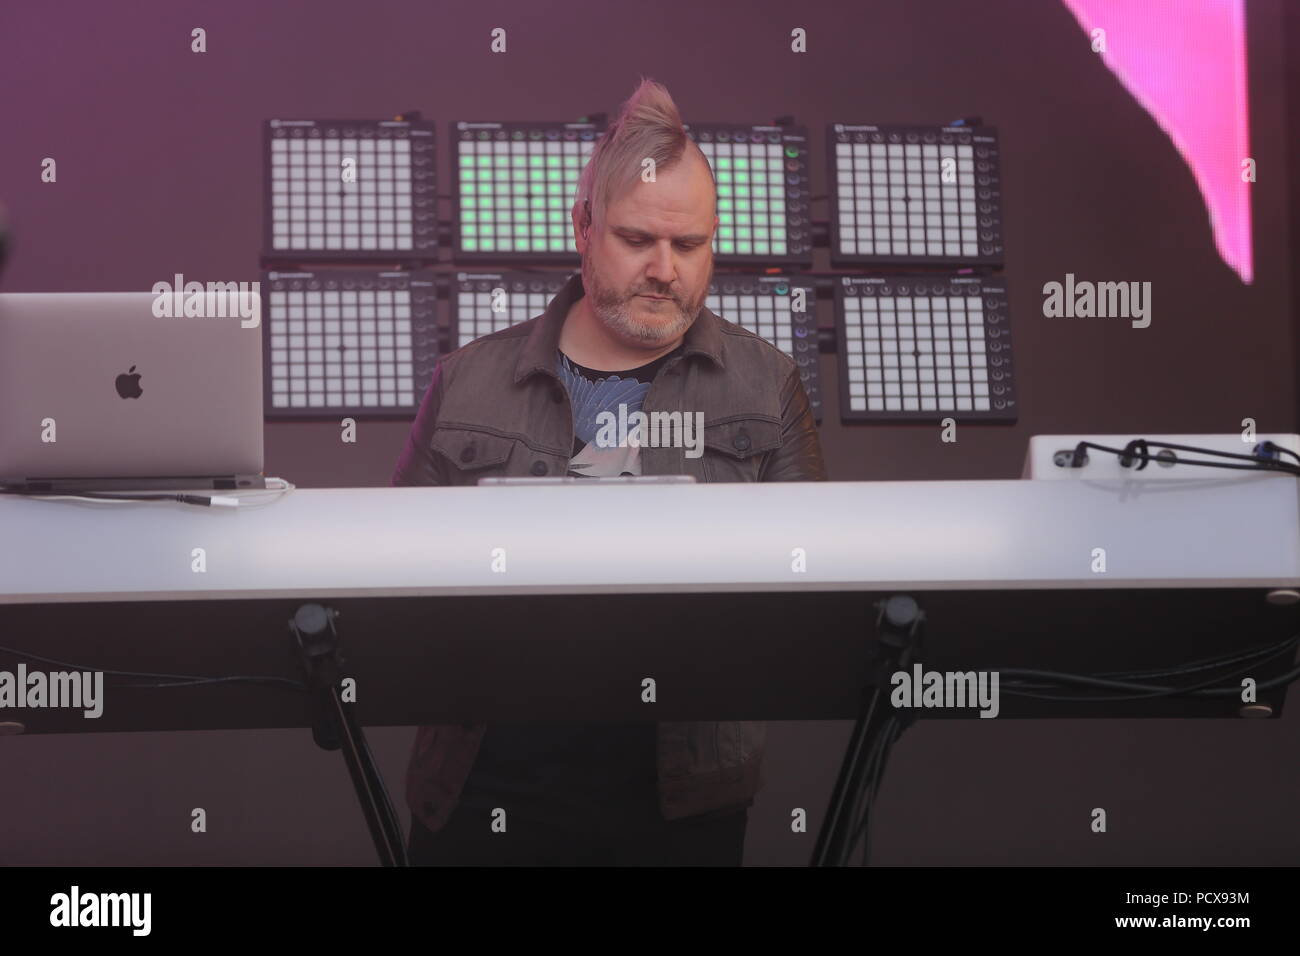 Siddington, Cheshire, UK. 4th August, 2018. Howard Jones performs live on the Main Stage at Rewind North at Capesthorne Hall in Cheshire. Stock Photo